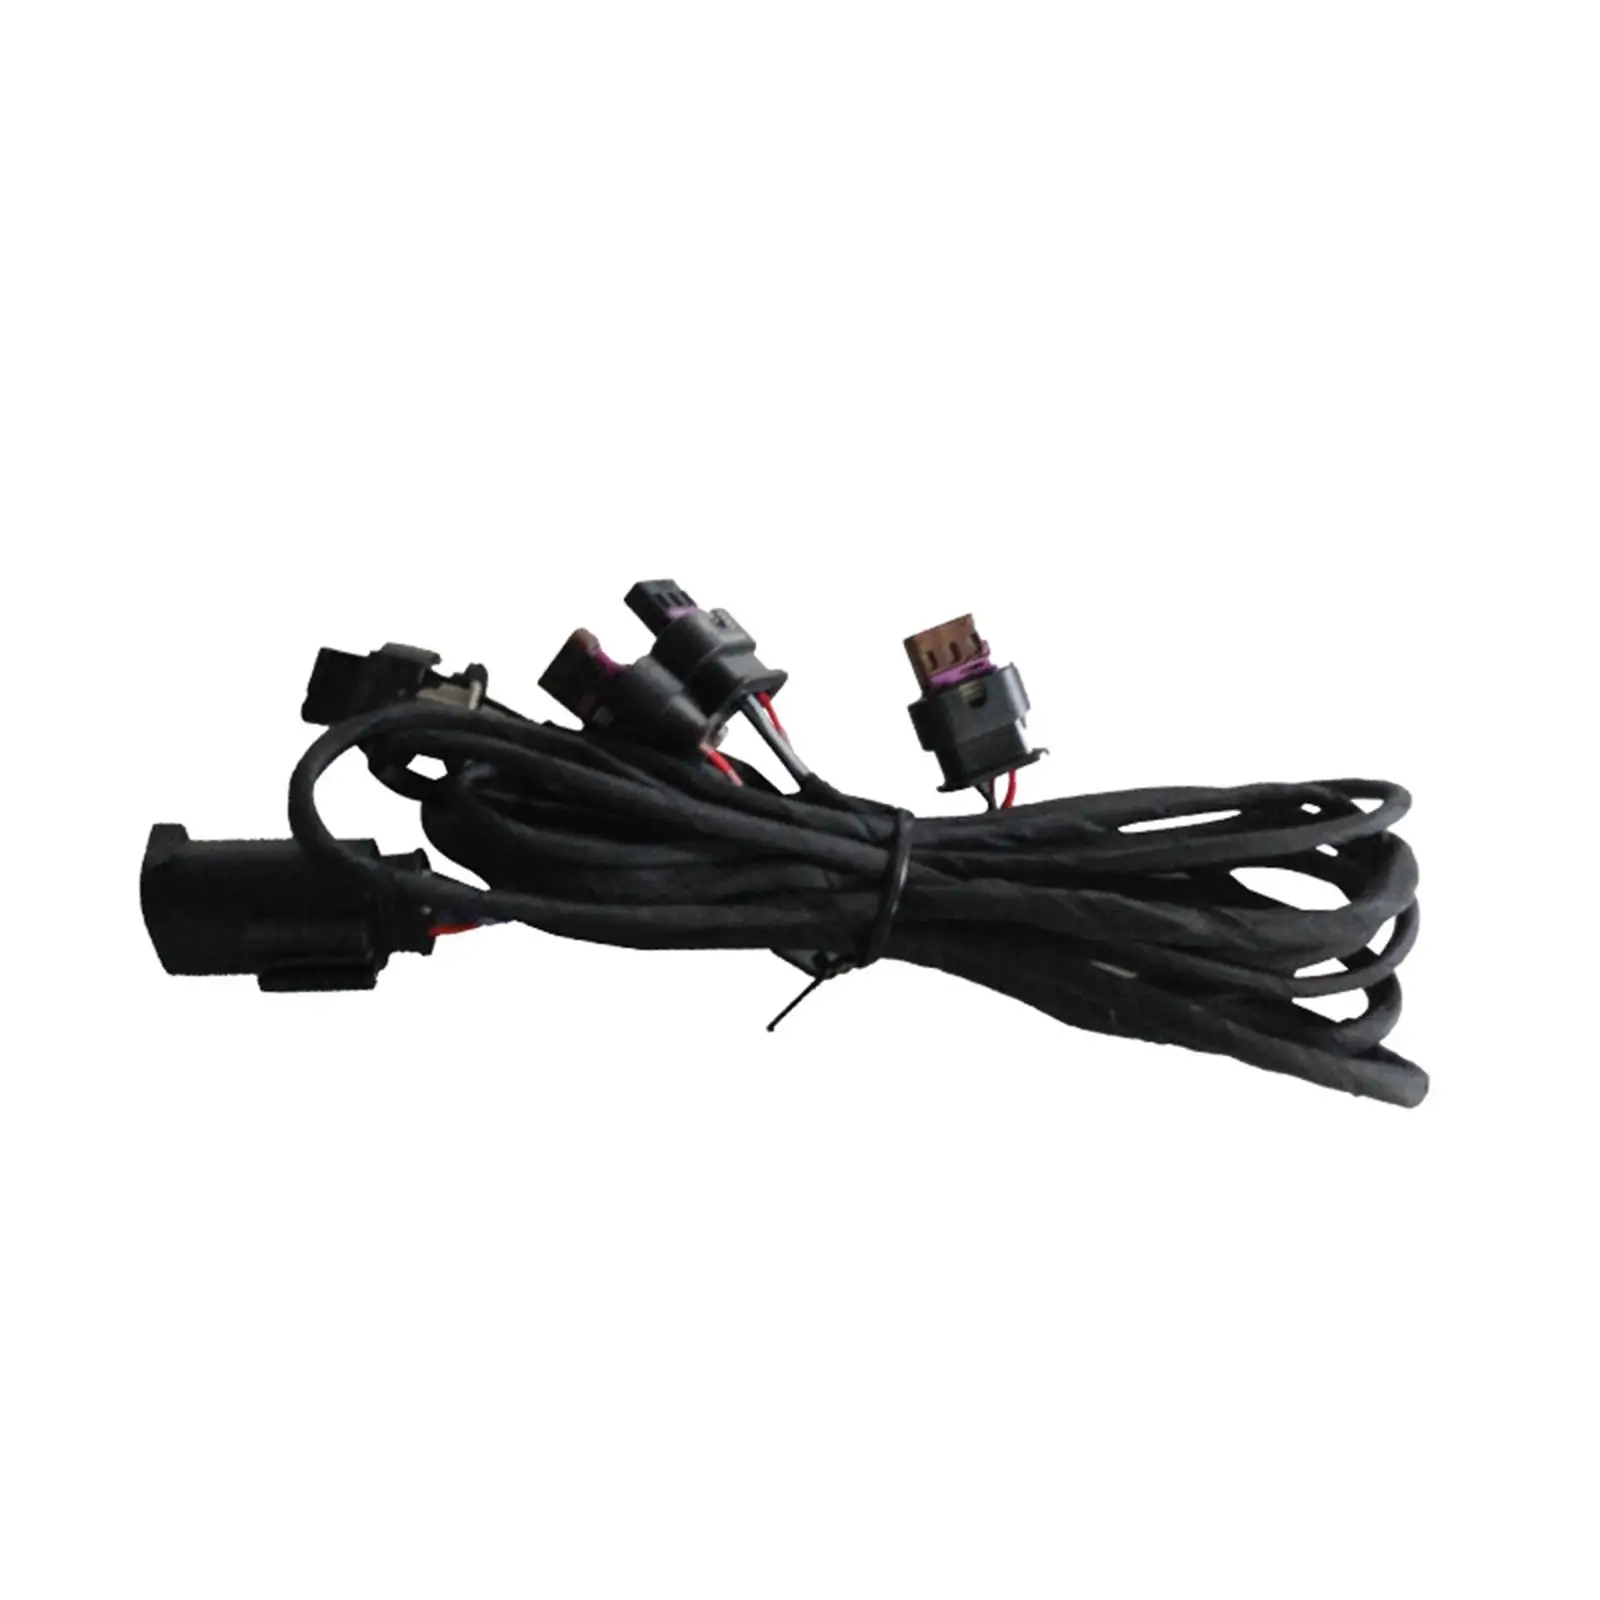 Parking Cables, Auto Accessory Replaces Front Rear Wiring Harness for 3 Series 4 Series F33 F30, Sturdy, Repair Part